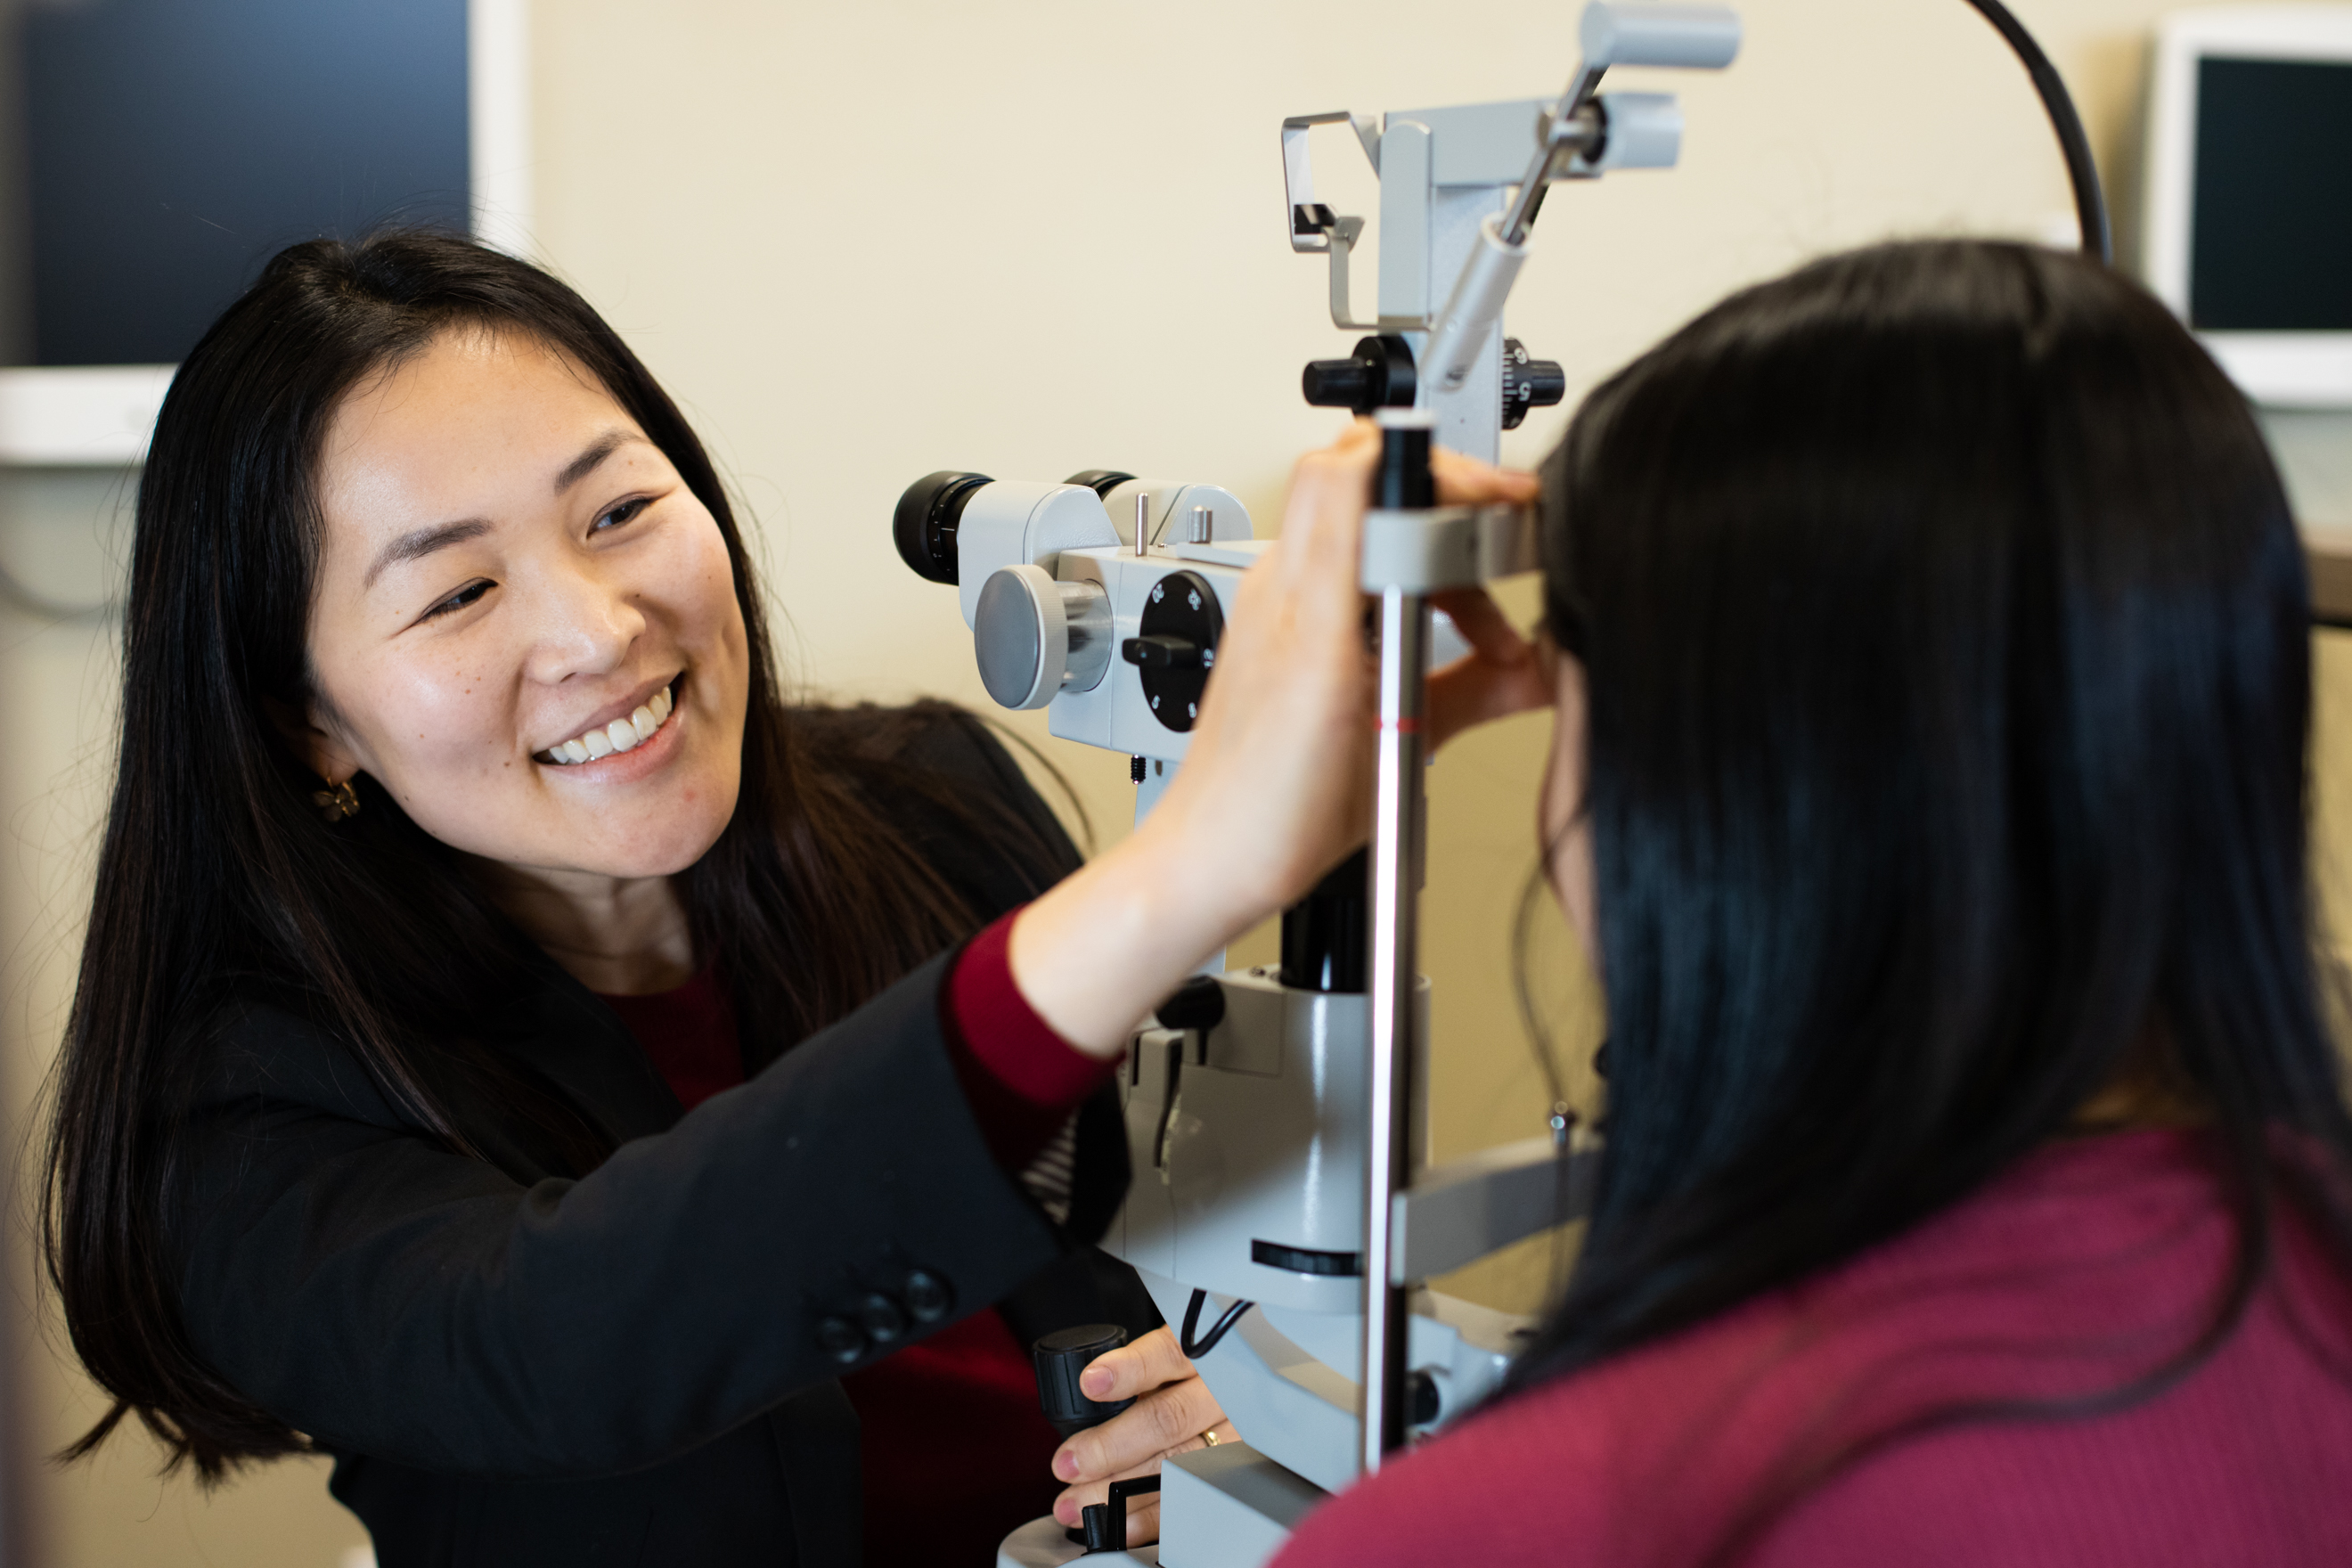 An optometrist in training examines a patient's eyes in a clinic.